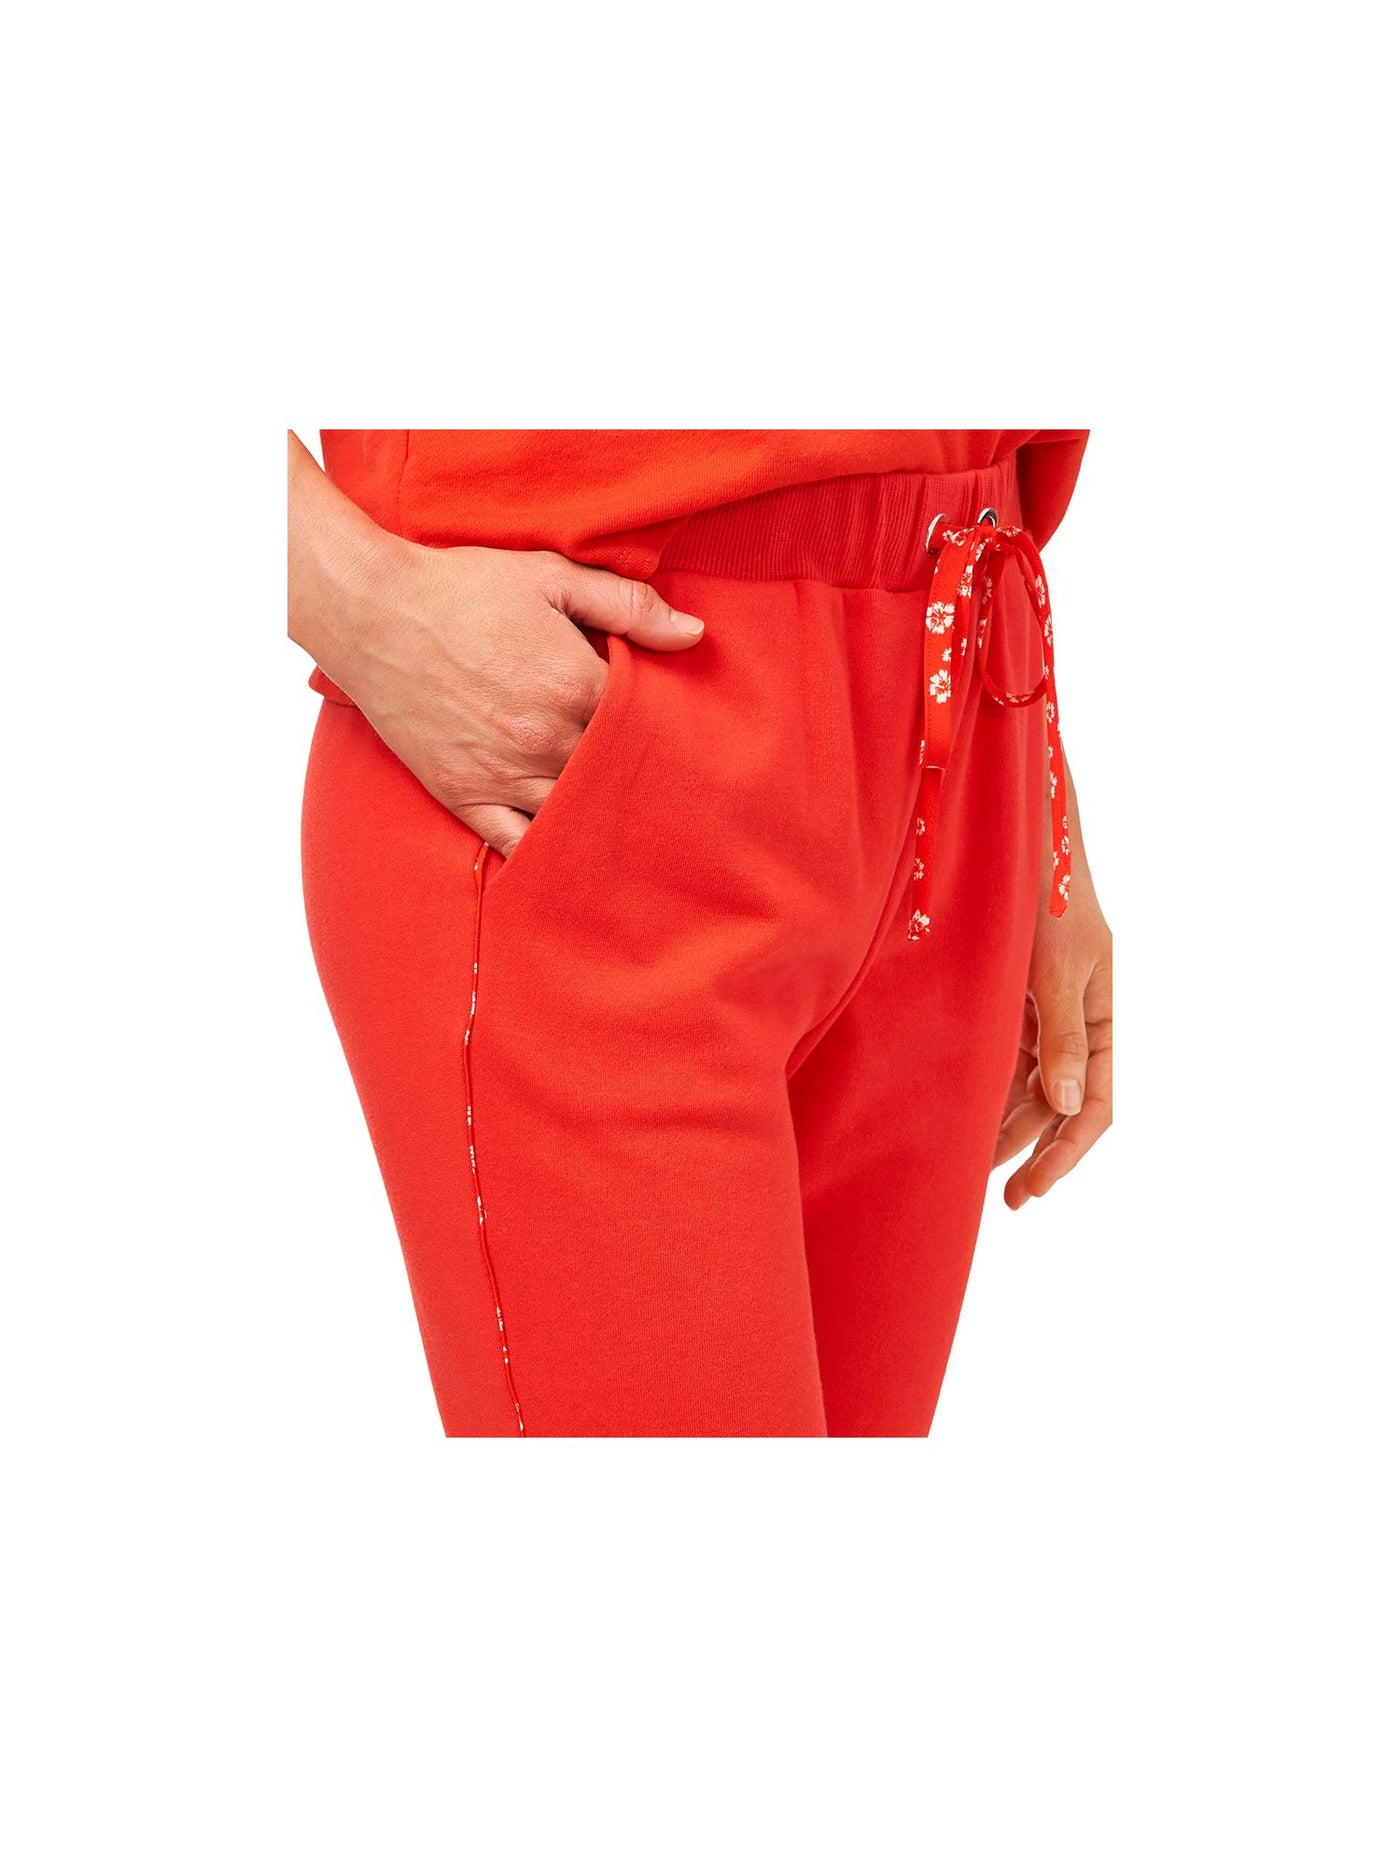 RILEY&RAE Womens Red Pocketed Tie Side Stripes Jogger Lounge Pants S